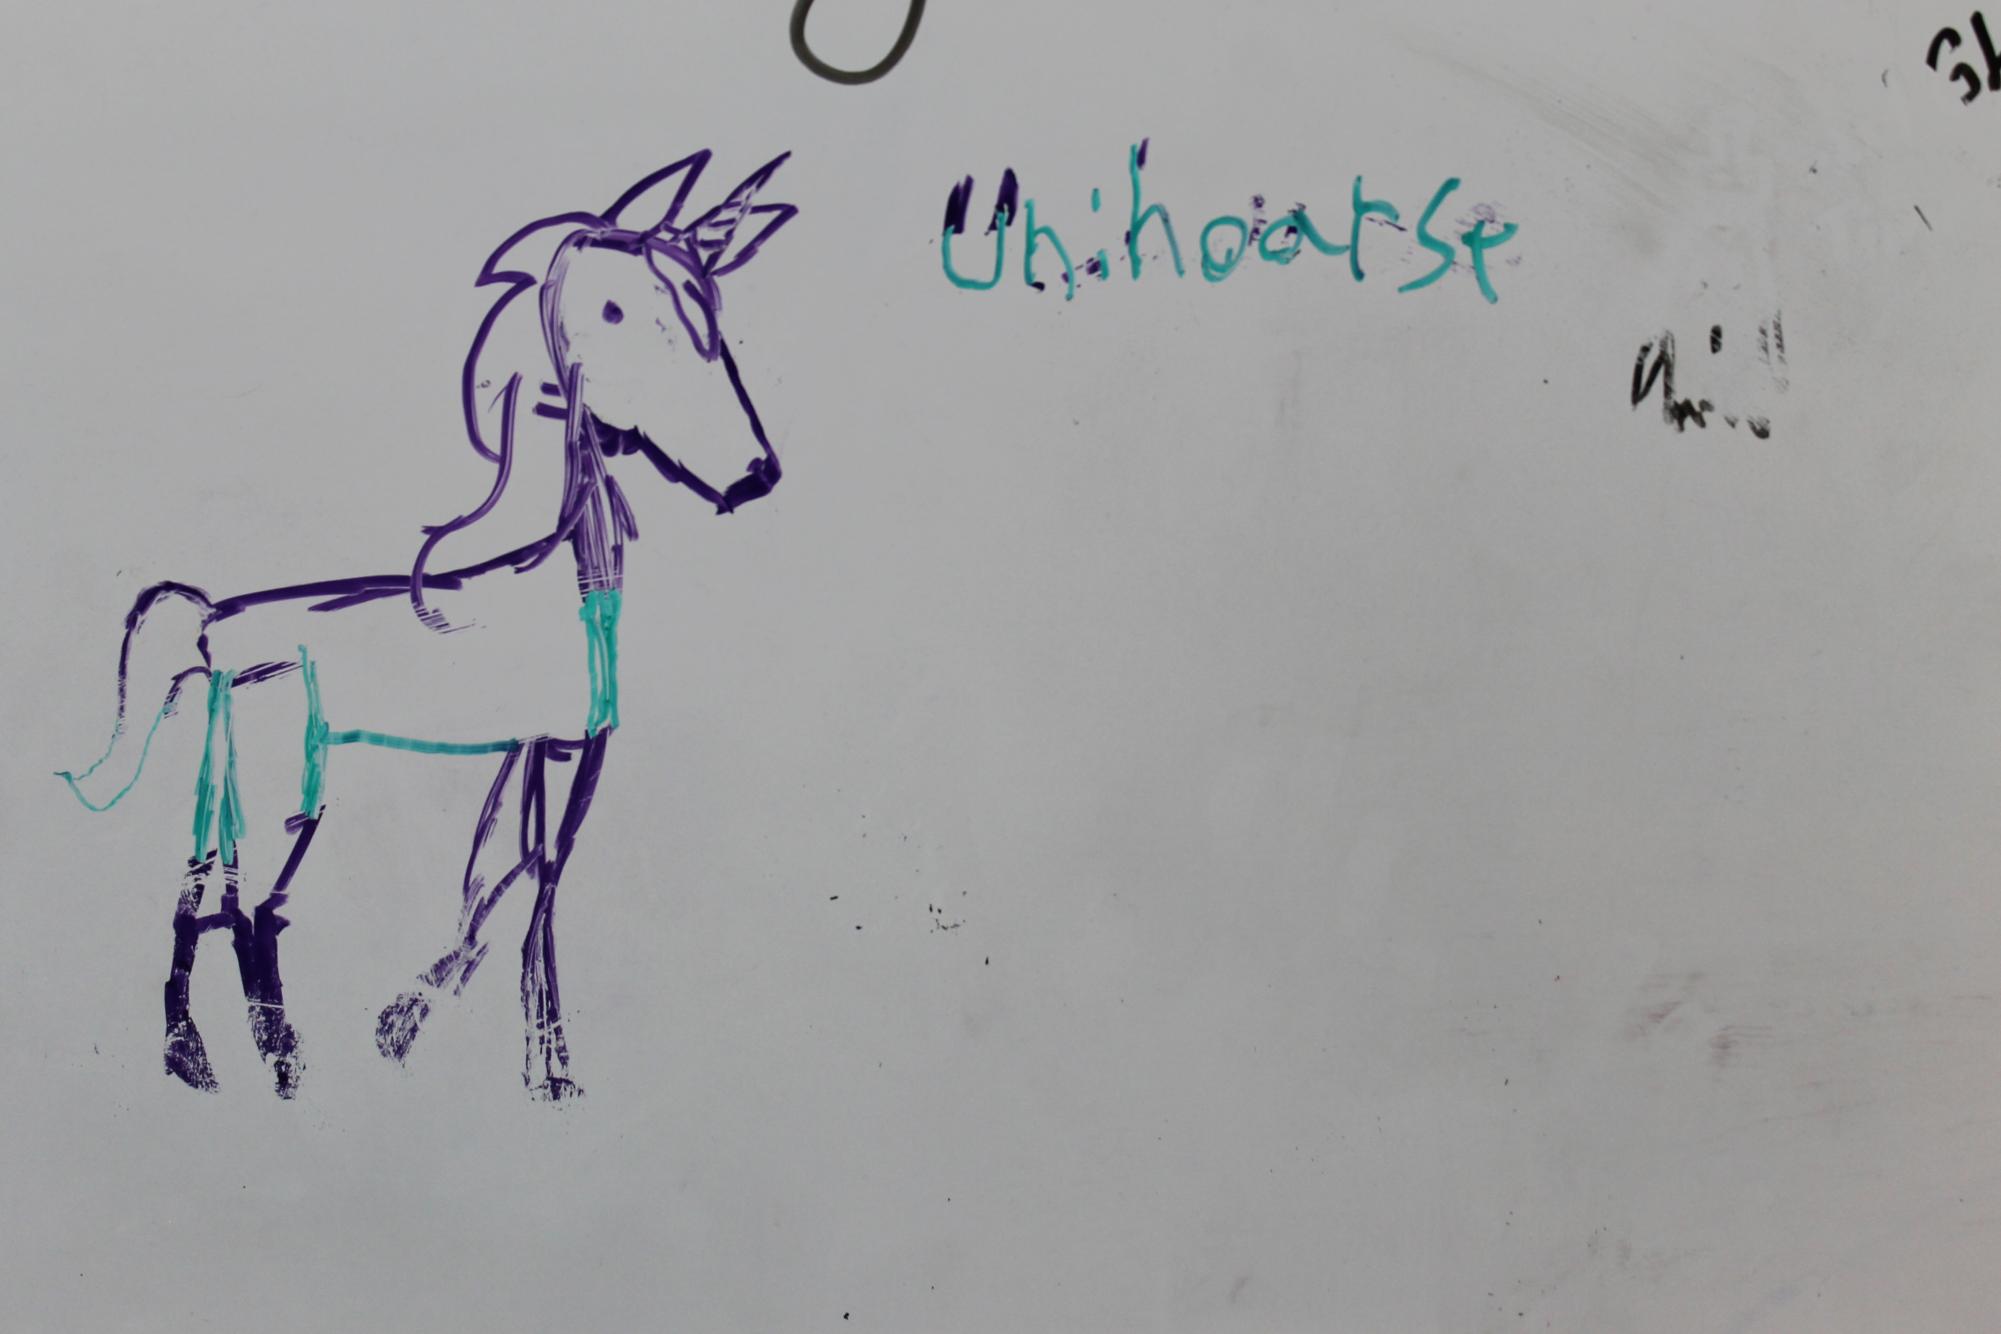 The Mysterious Unihoarse drawn by a unknown creator, Recently rudely partially erased and then repaired by me with a green expo marker. 